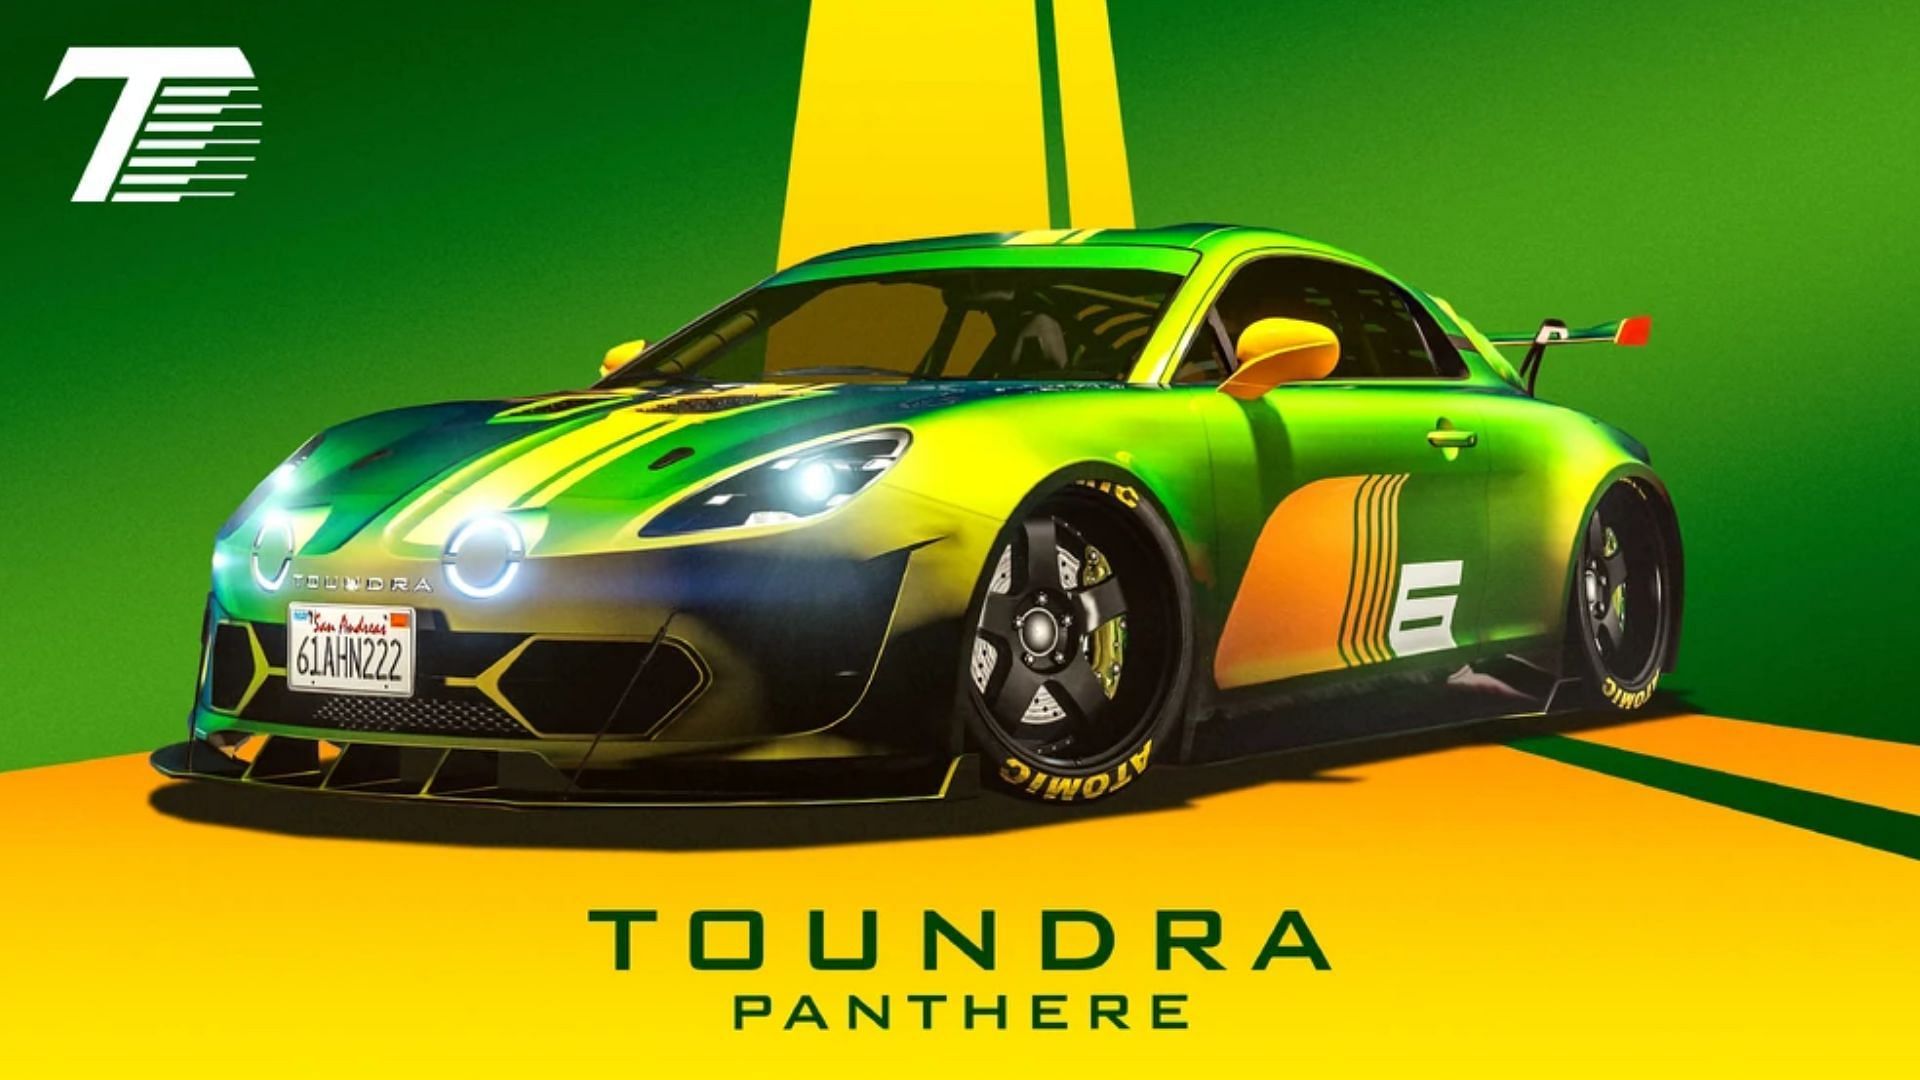 The Toundra Panthere has many alternatives in GTA Online (Image via Rockstar Games)